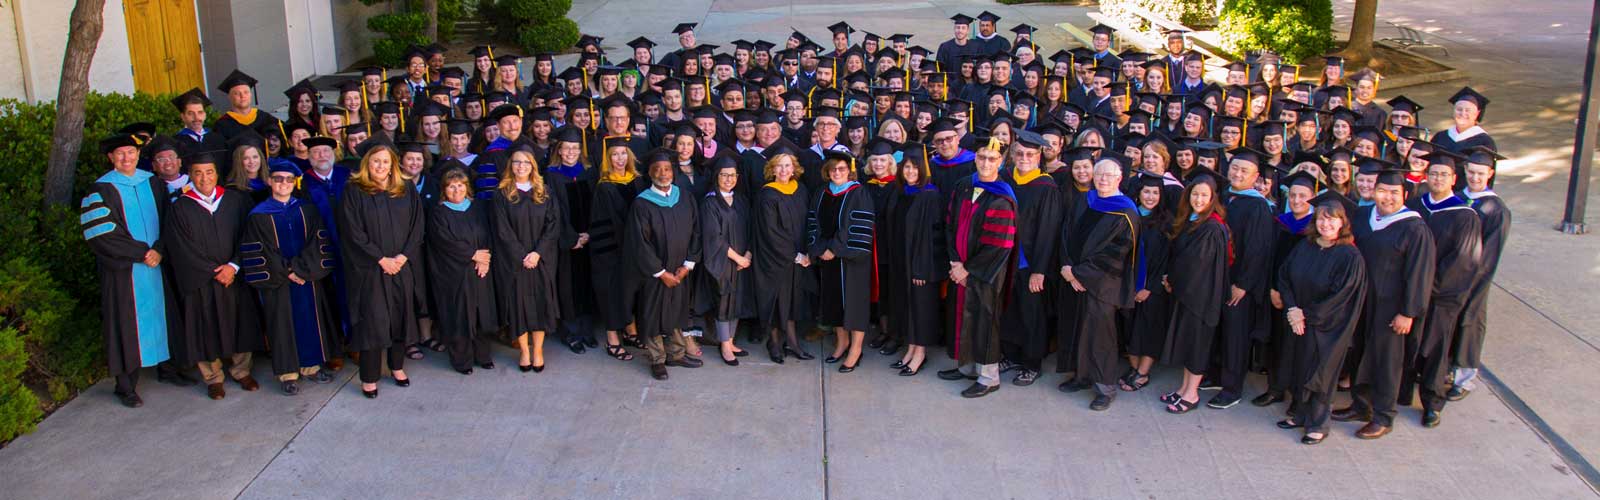 faculty at 2017 commencement